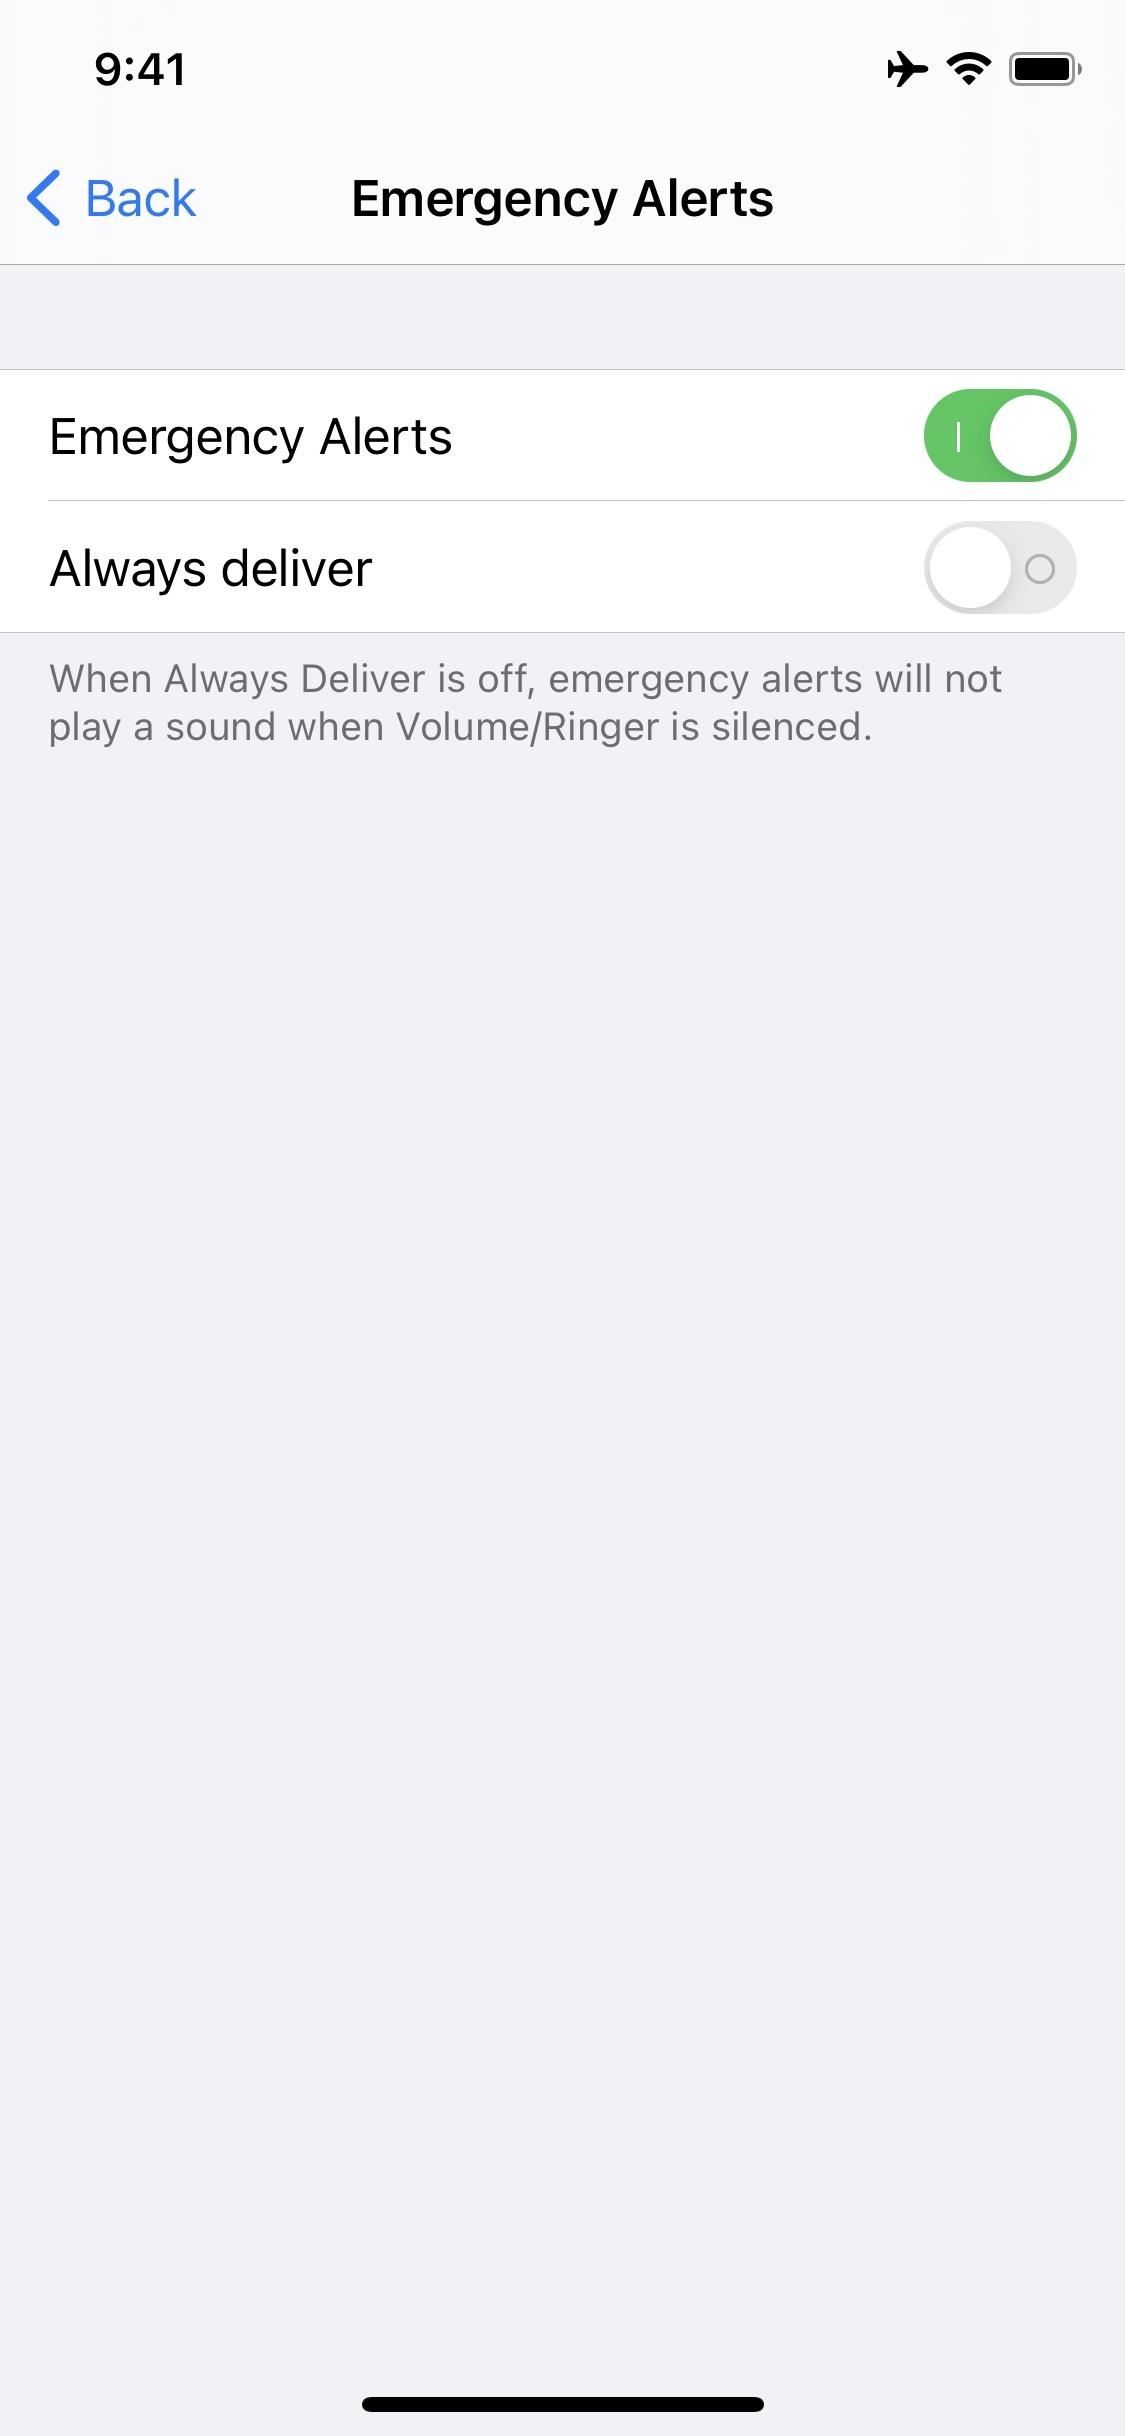 How to Silence Emergency Alerts on iPhone Without Disabling Them Completely